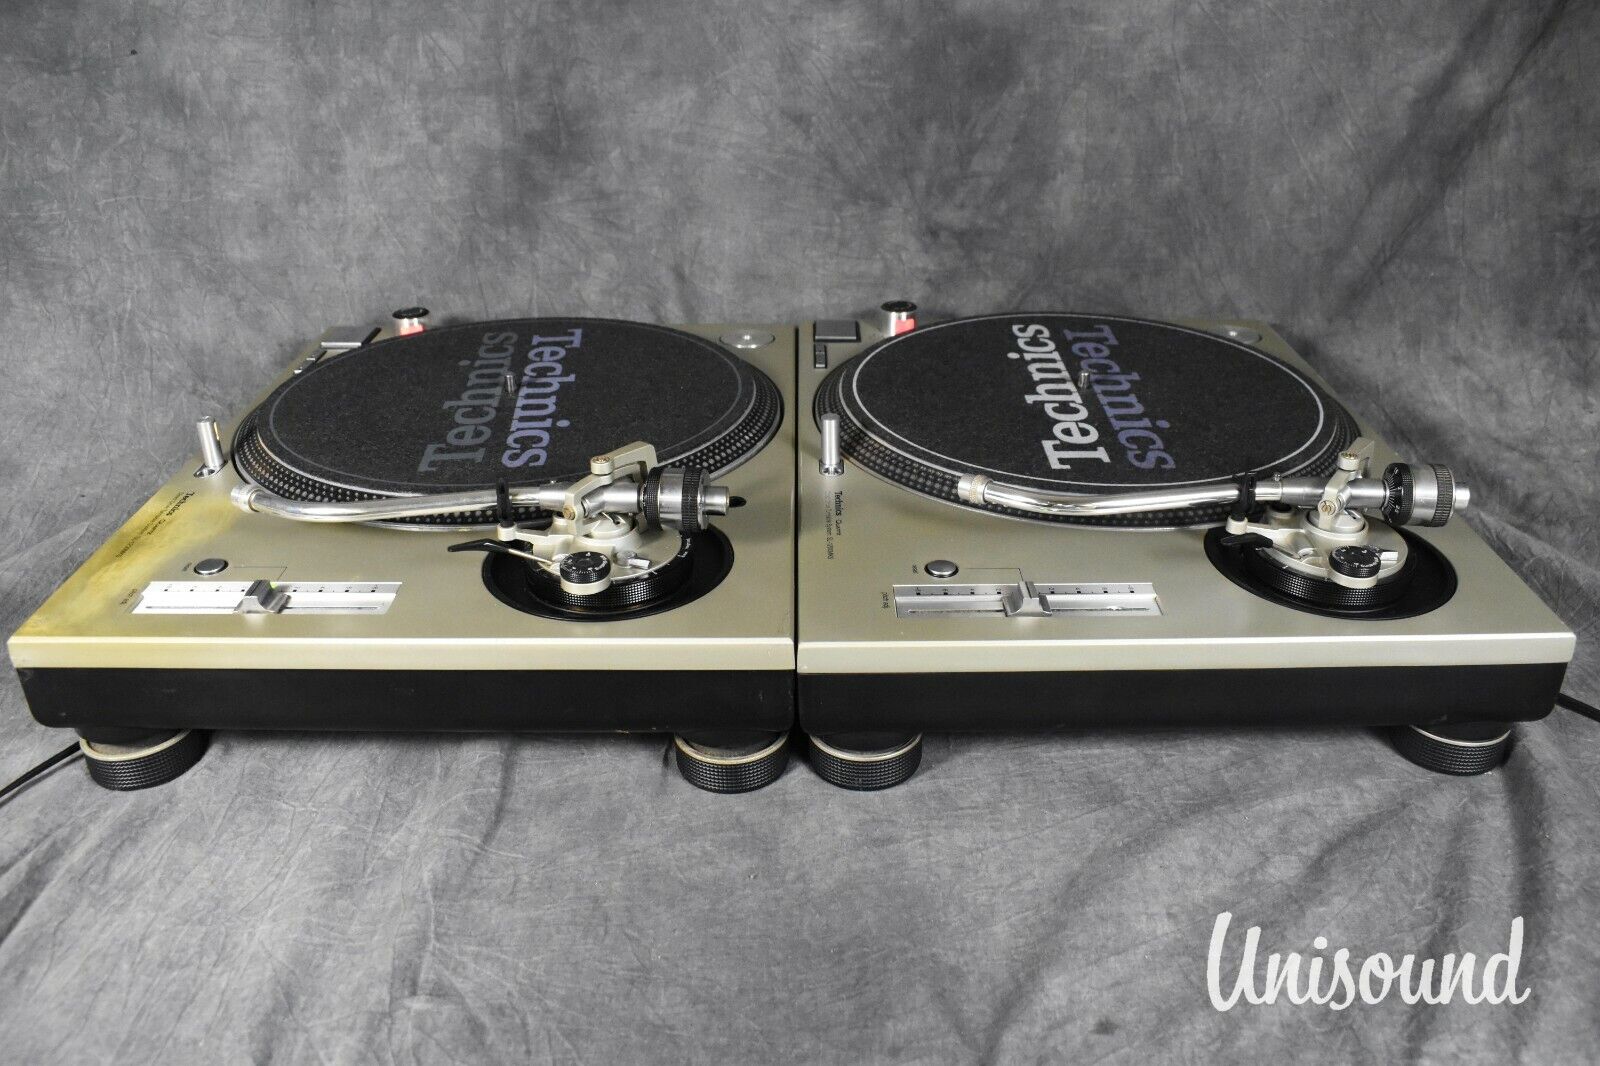 Technics SL-1200 MK5 Silver pair Direct Drive DJ Turntable in Good Condition